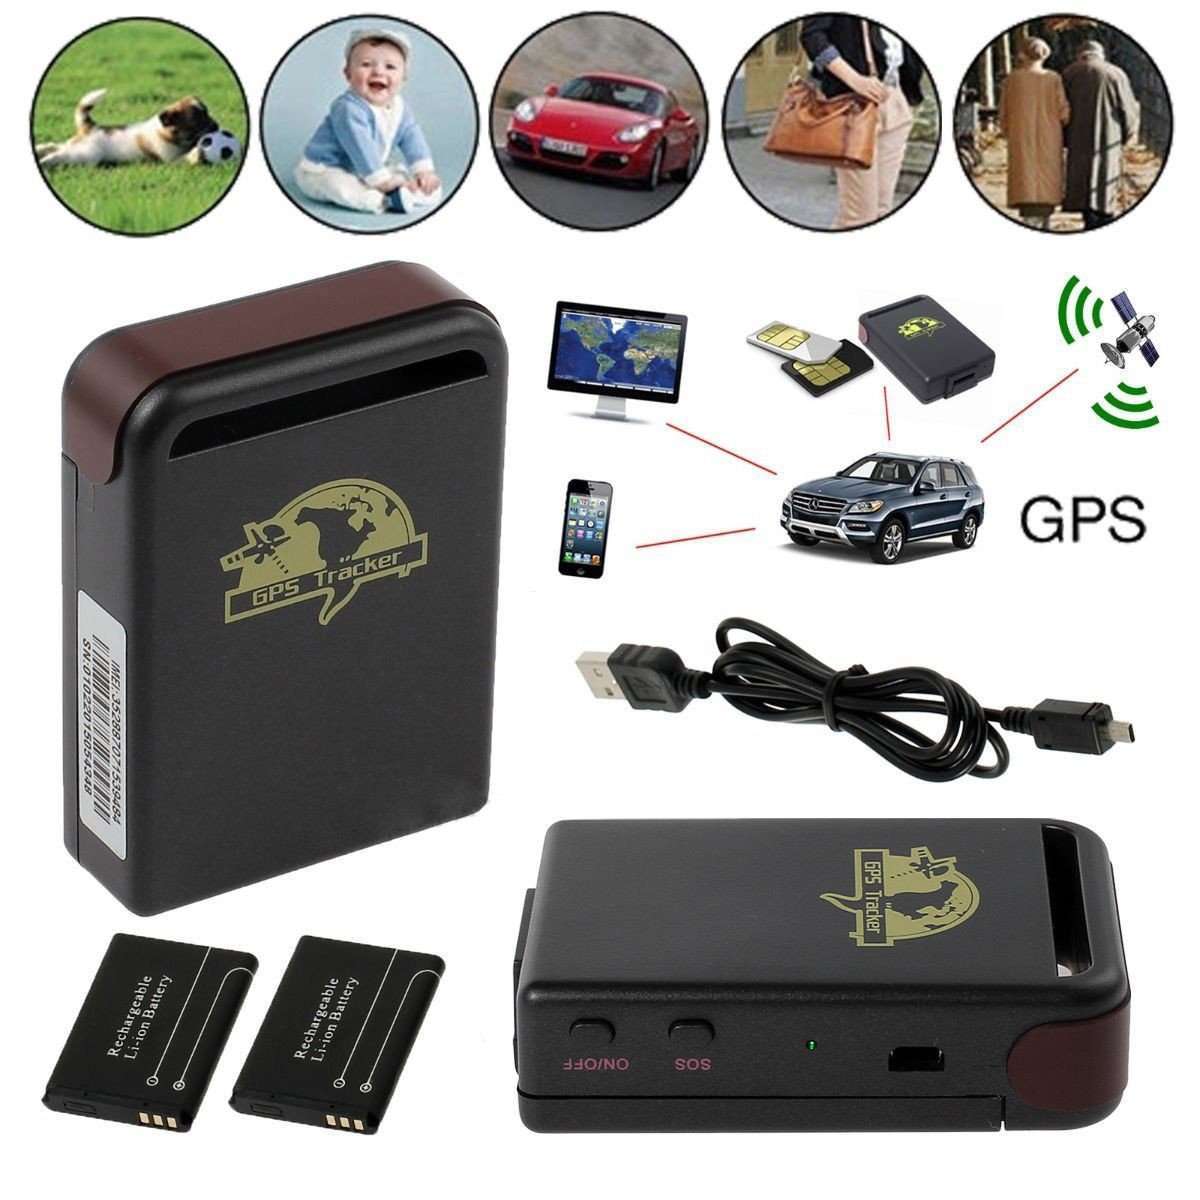 Traceur GPS tracking GPRS GSM SOS voiture animaux auto moto